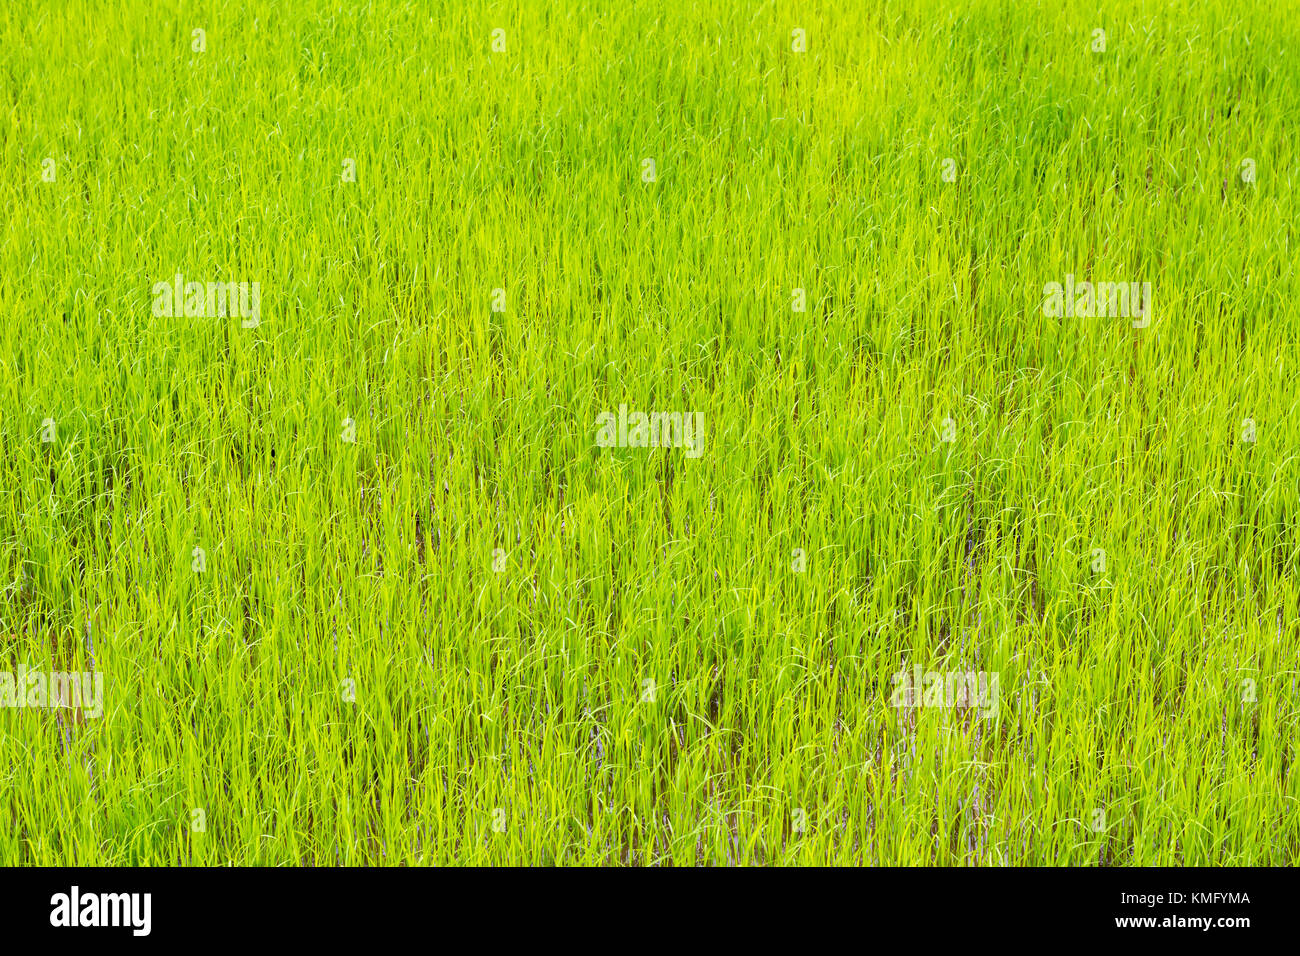 Rice field in countryside Thailand Stock Photo